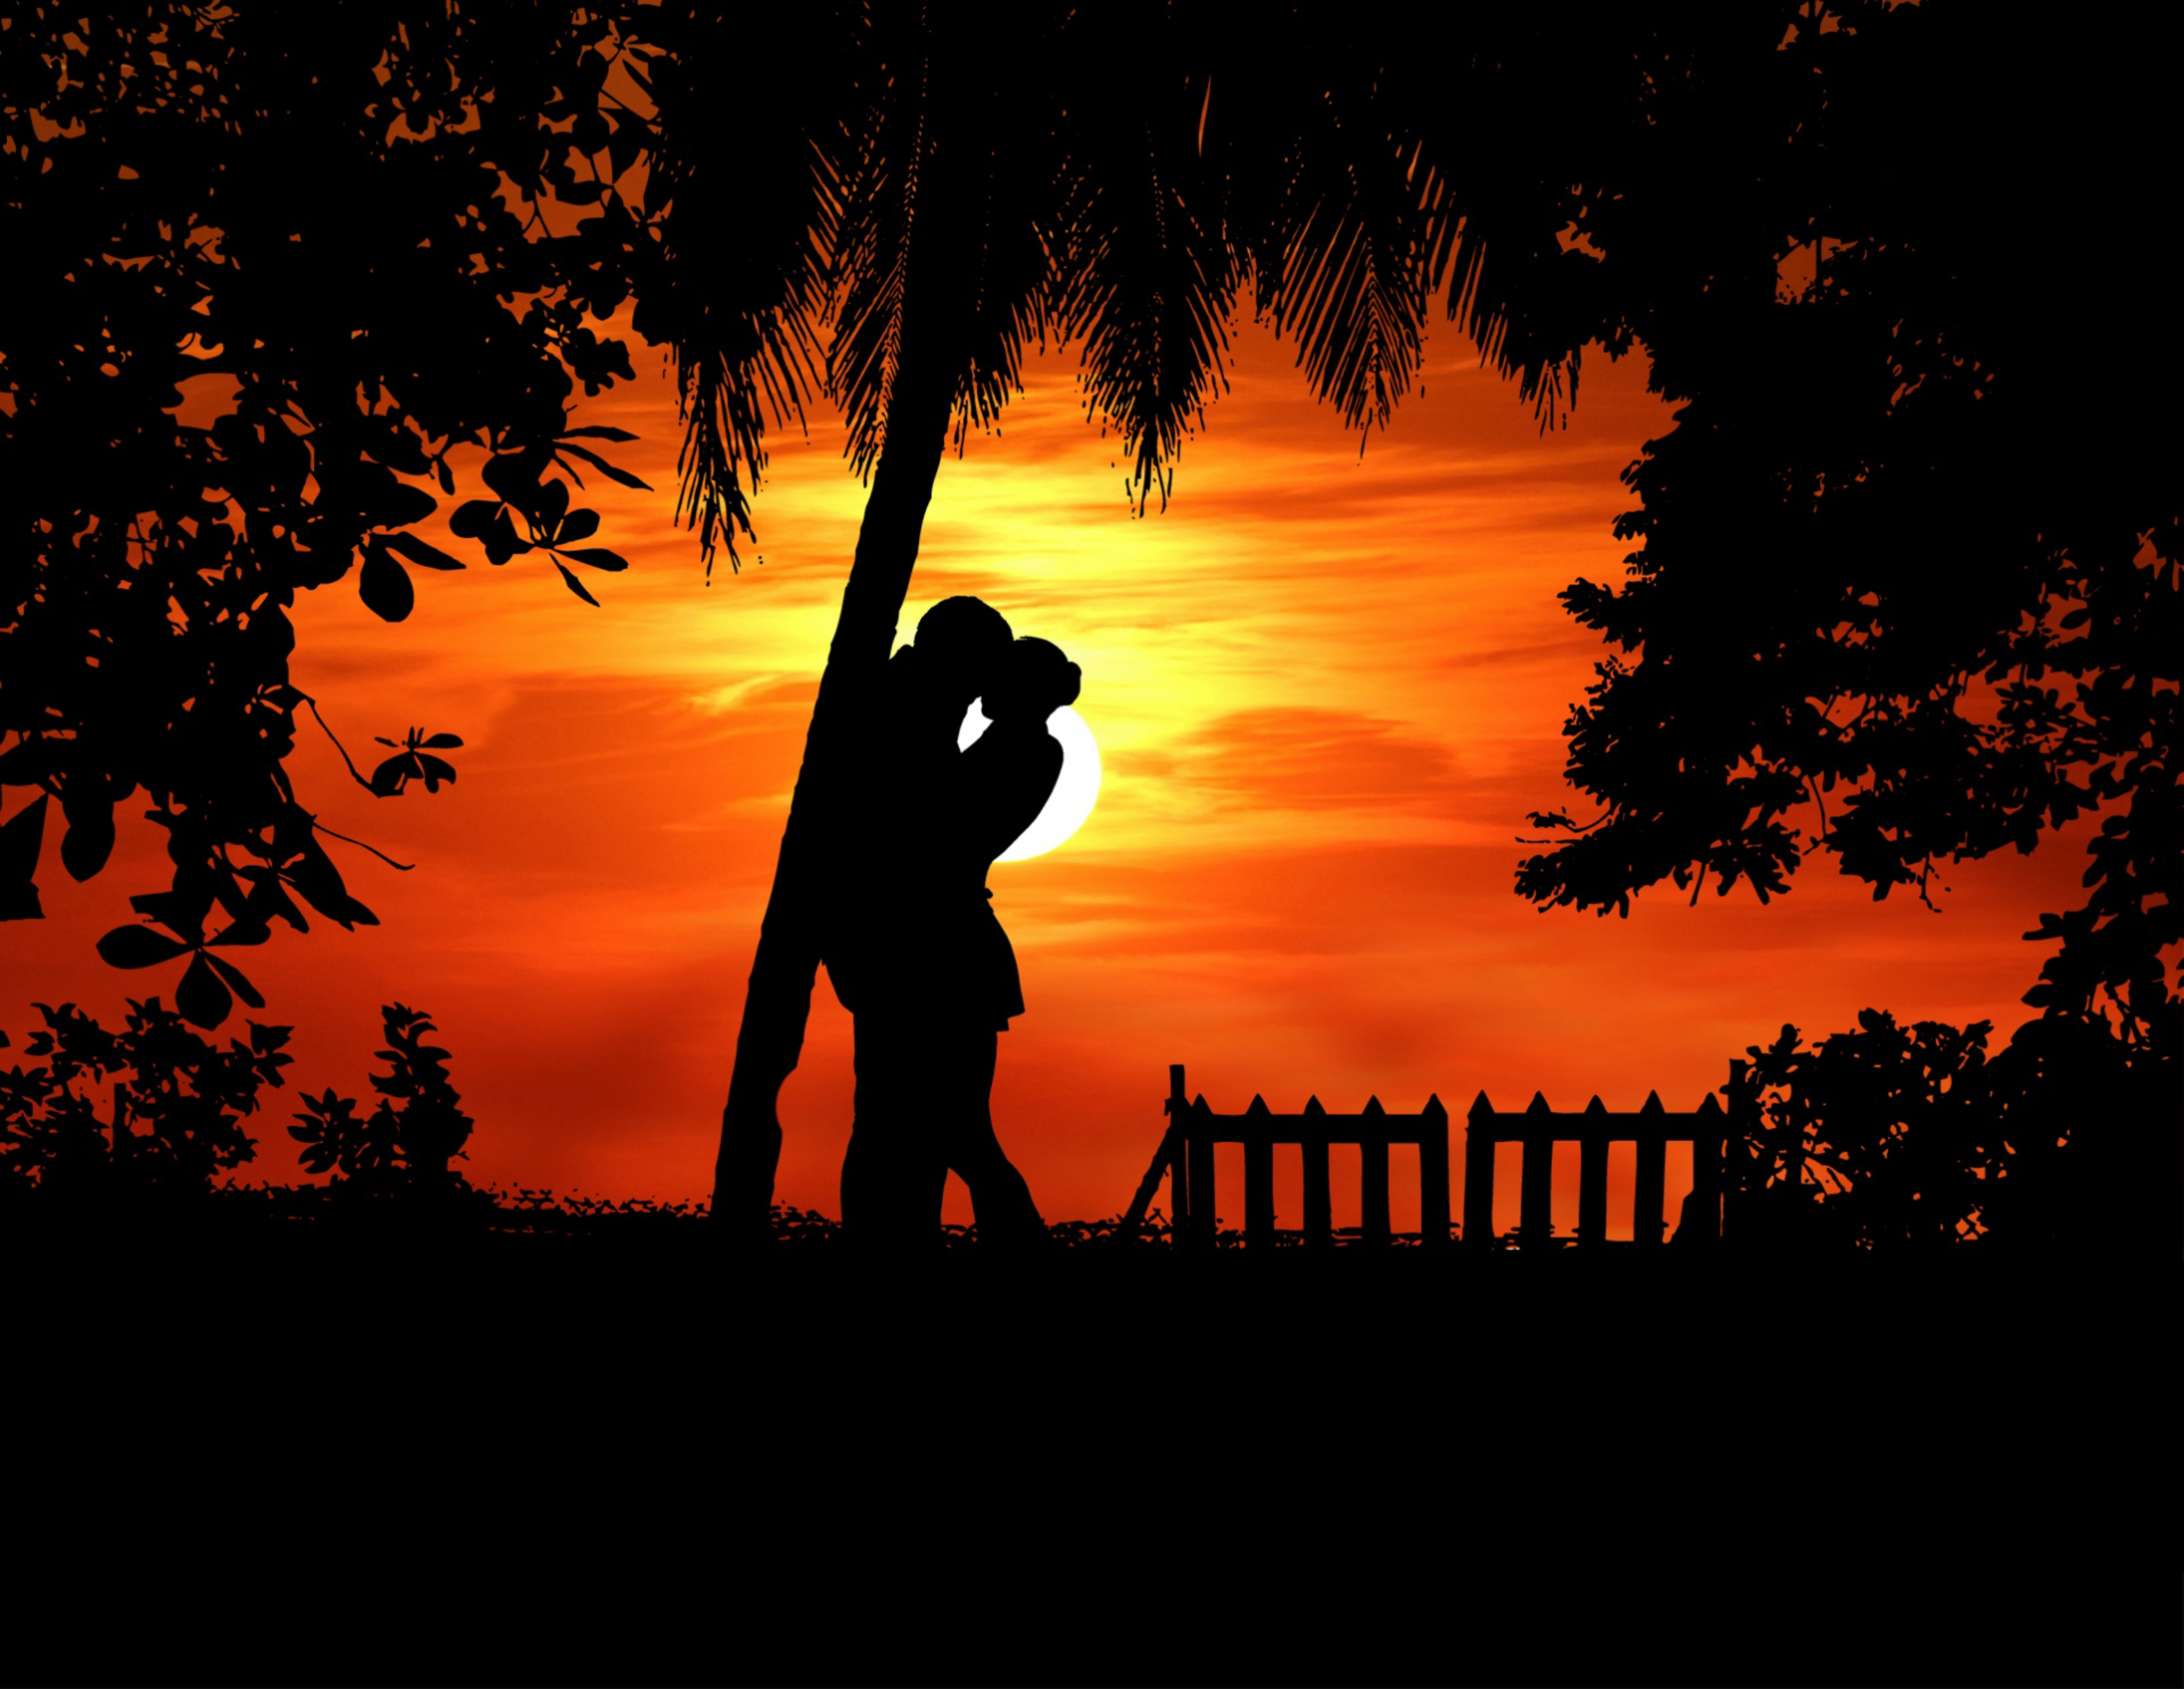 android romance, embrace, silhouettes, love, couple, tropics, pair